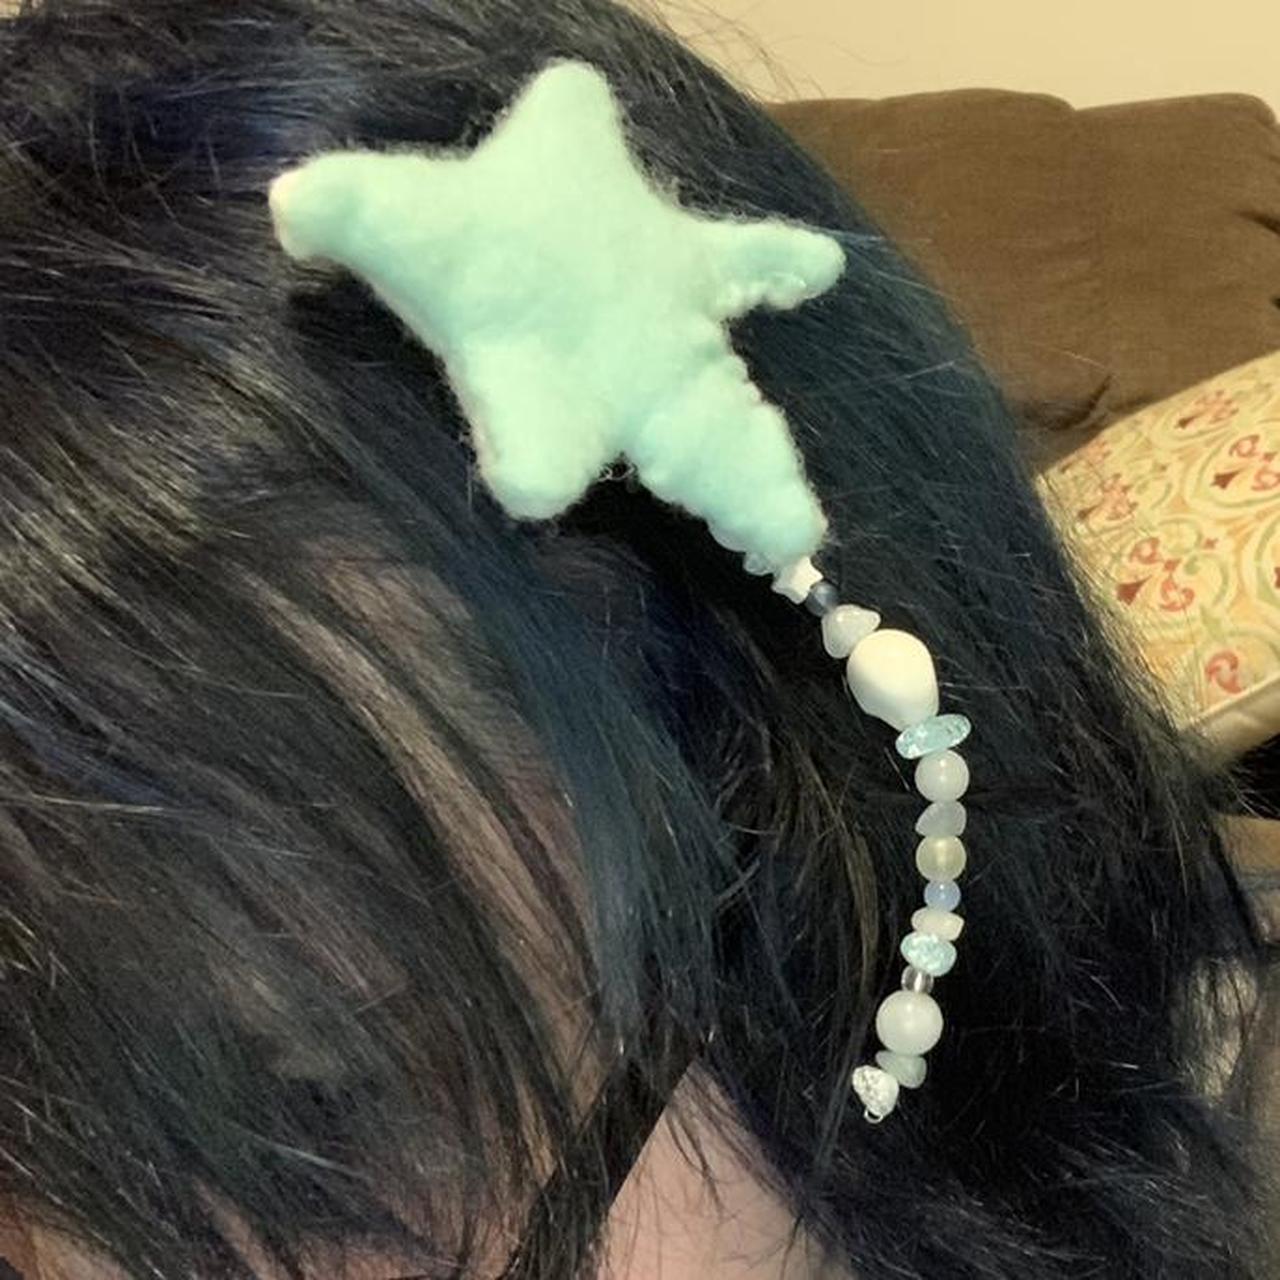 Women's Blue and White Hair-accessories (3)